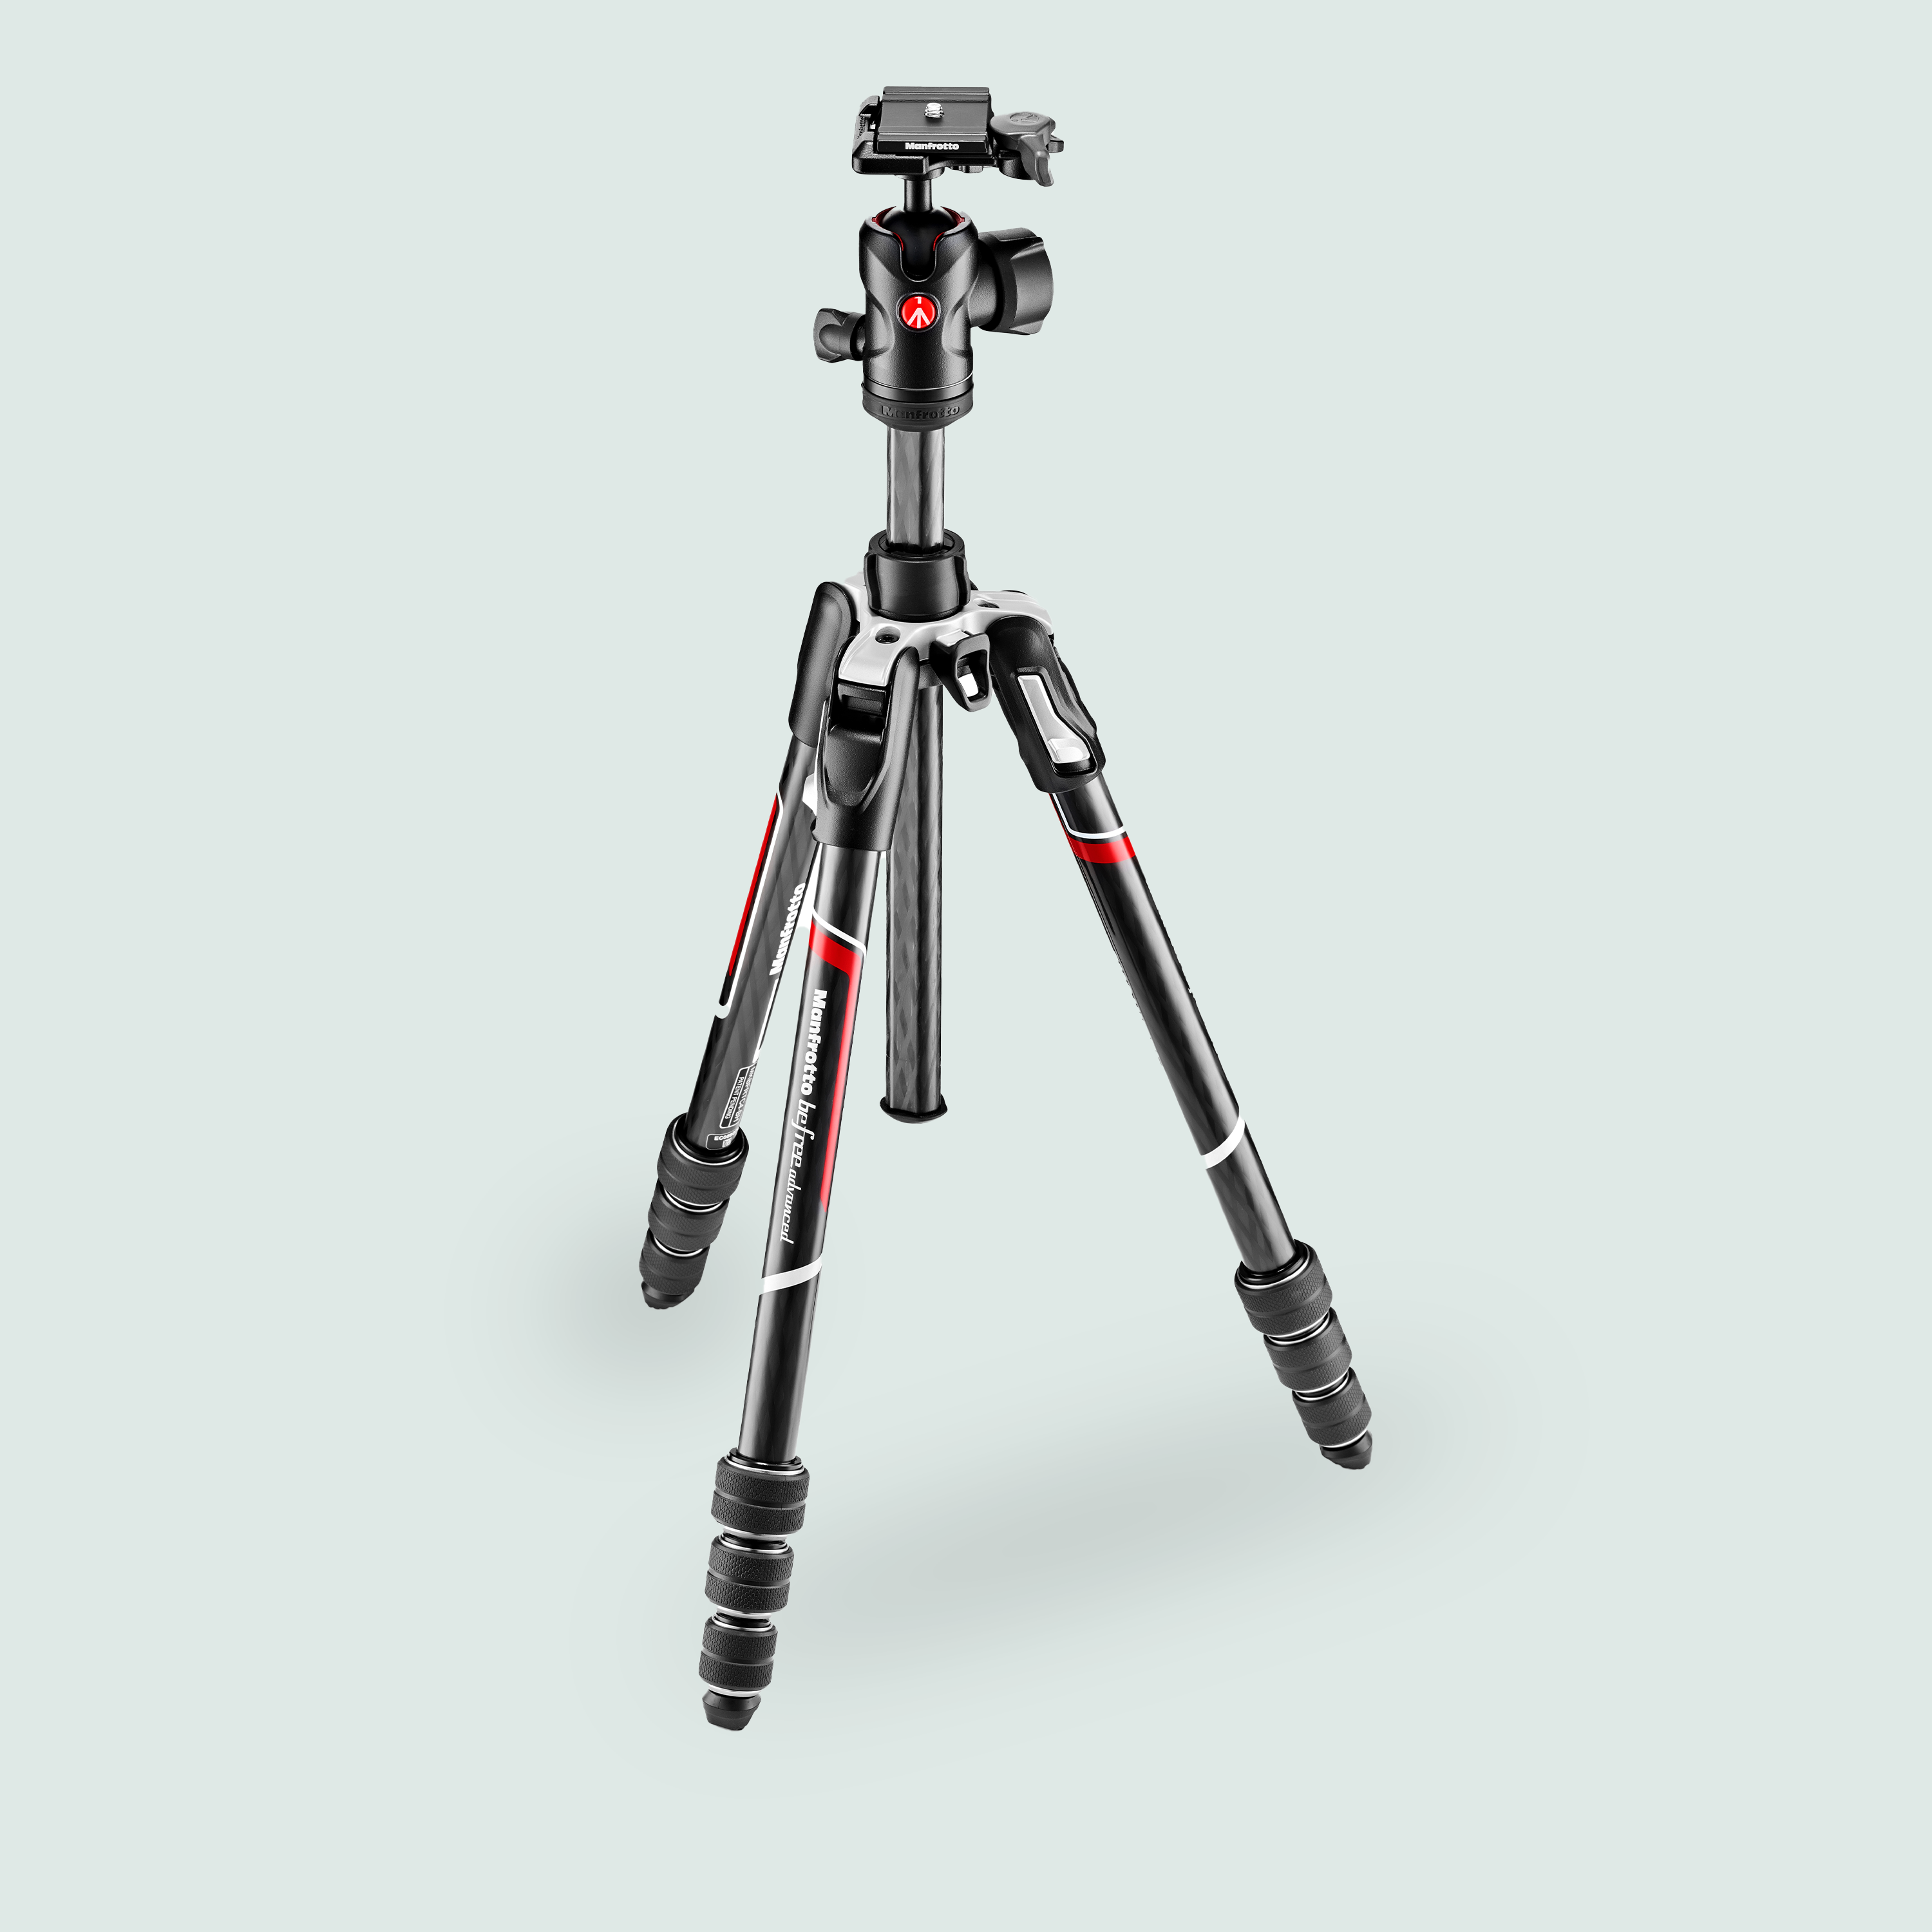 Manfrotto Tripod Kit Befree Advanced CF 41/150cm 8kg Payload Inc MH494-BH & bag